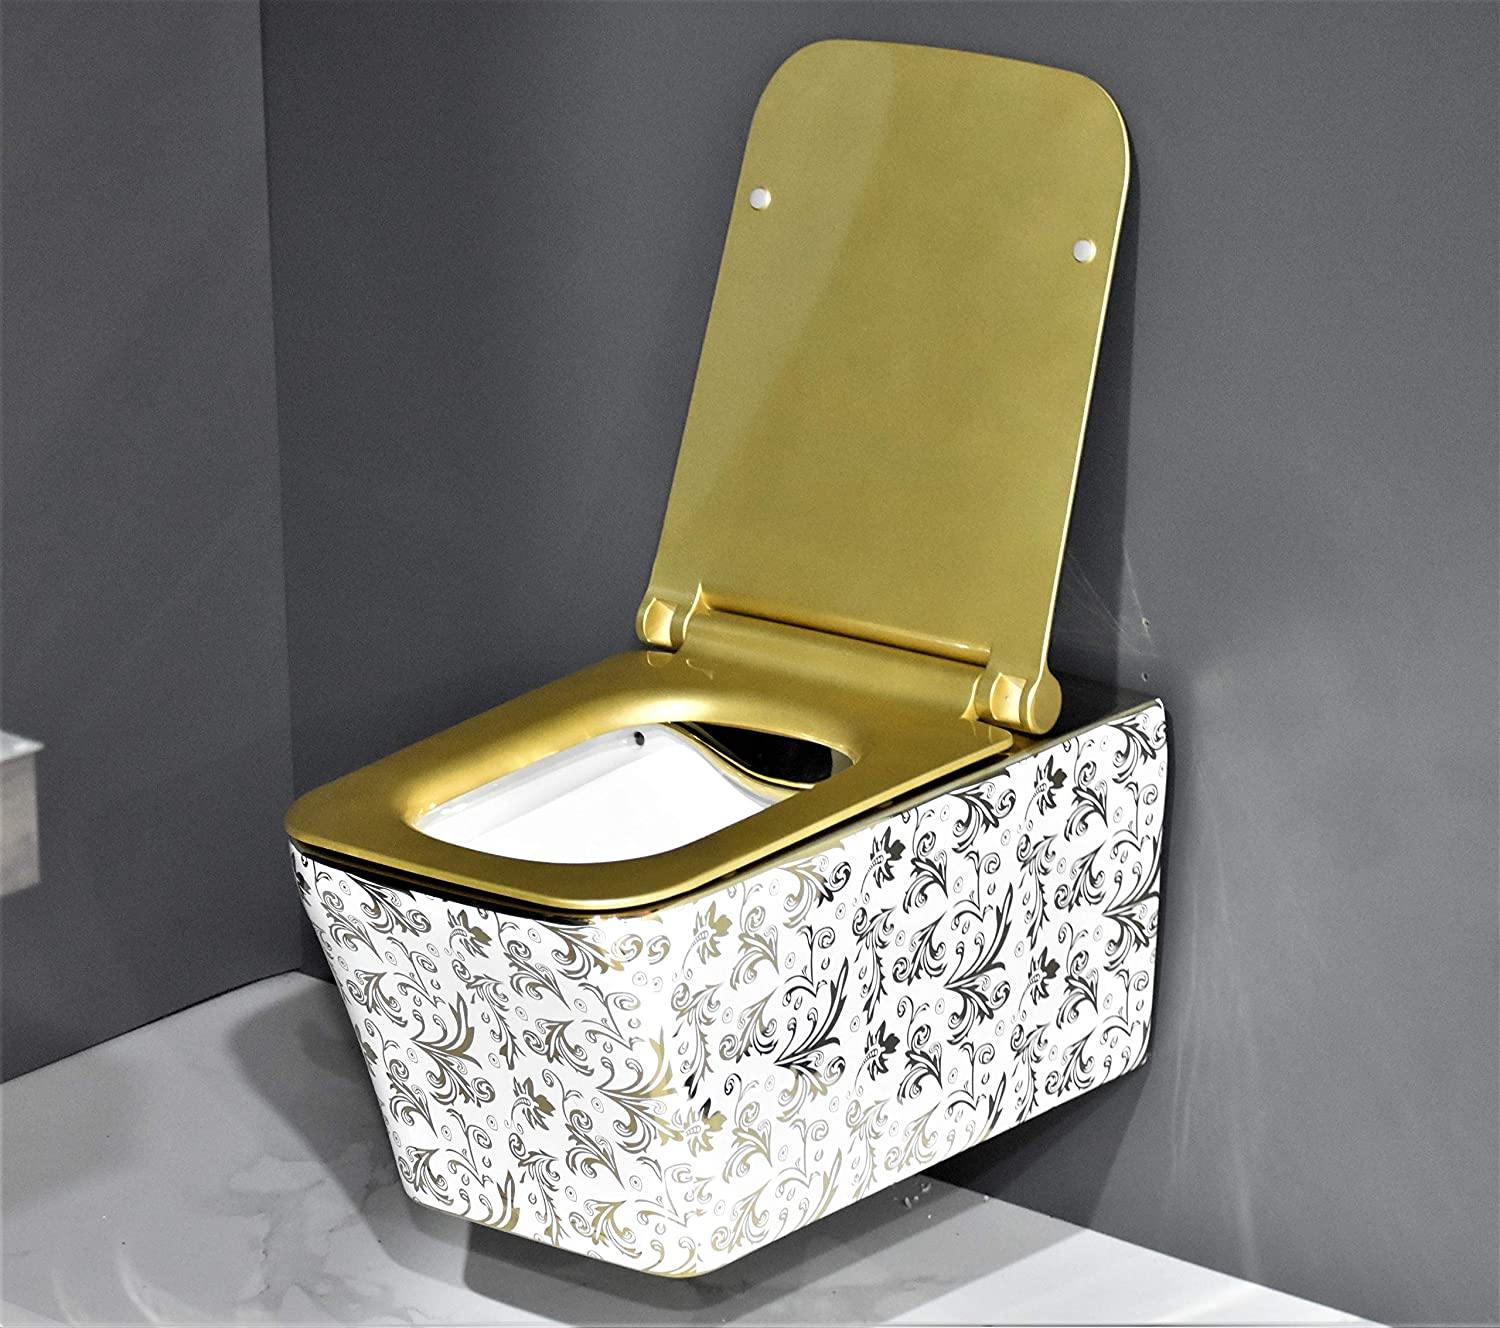 Ceramic Commode Wall Mount/Wall Hung Western Toilet/Commode/Water Closet/EWC/WC/European Commode with Soft Close Seat Cover in Gold Color - Bath Outlet